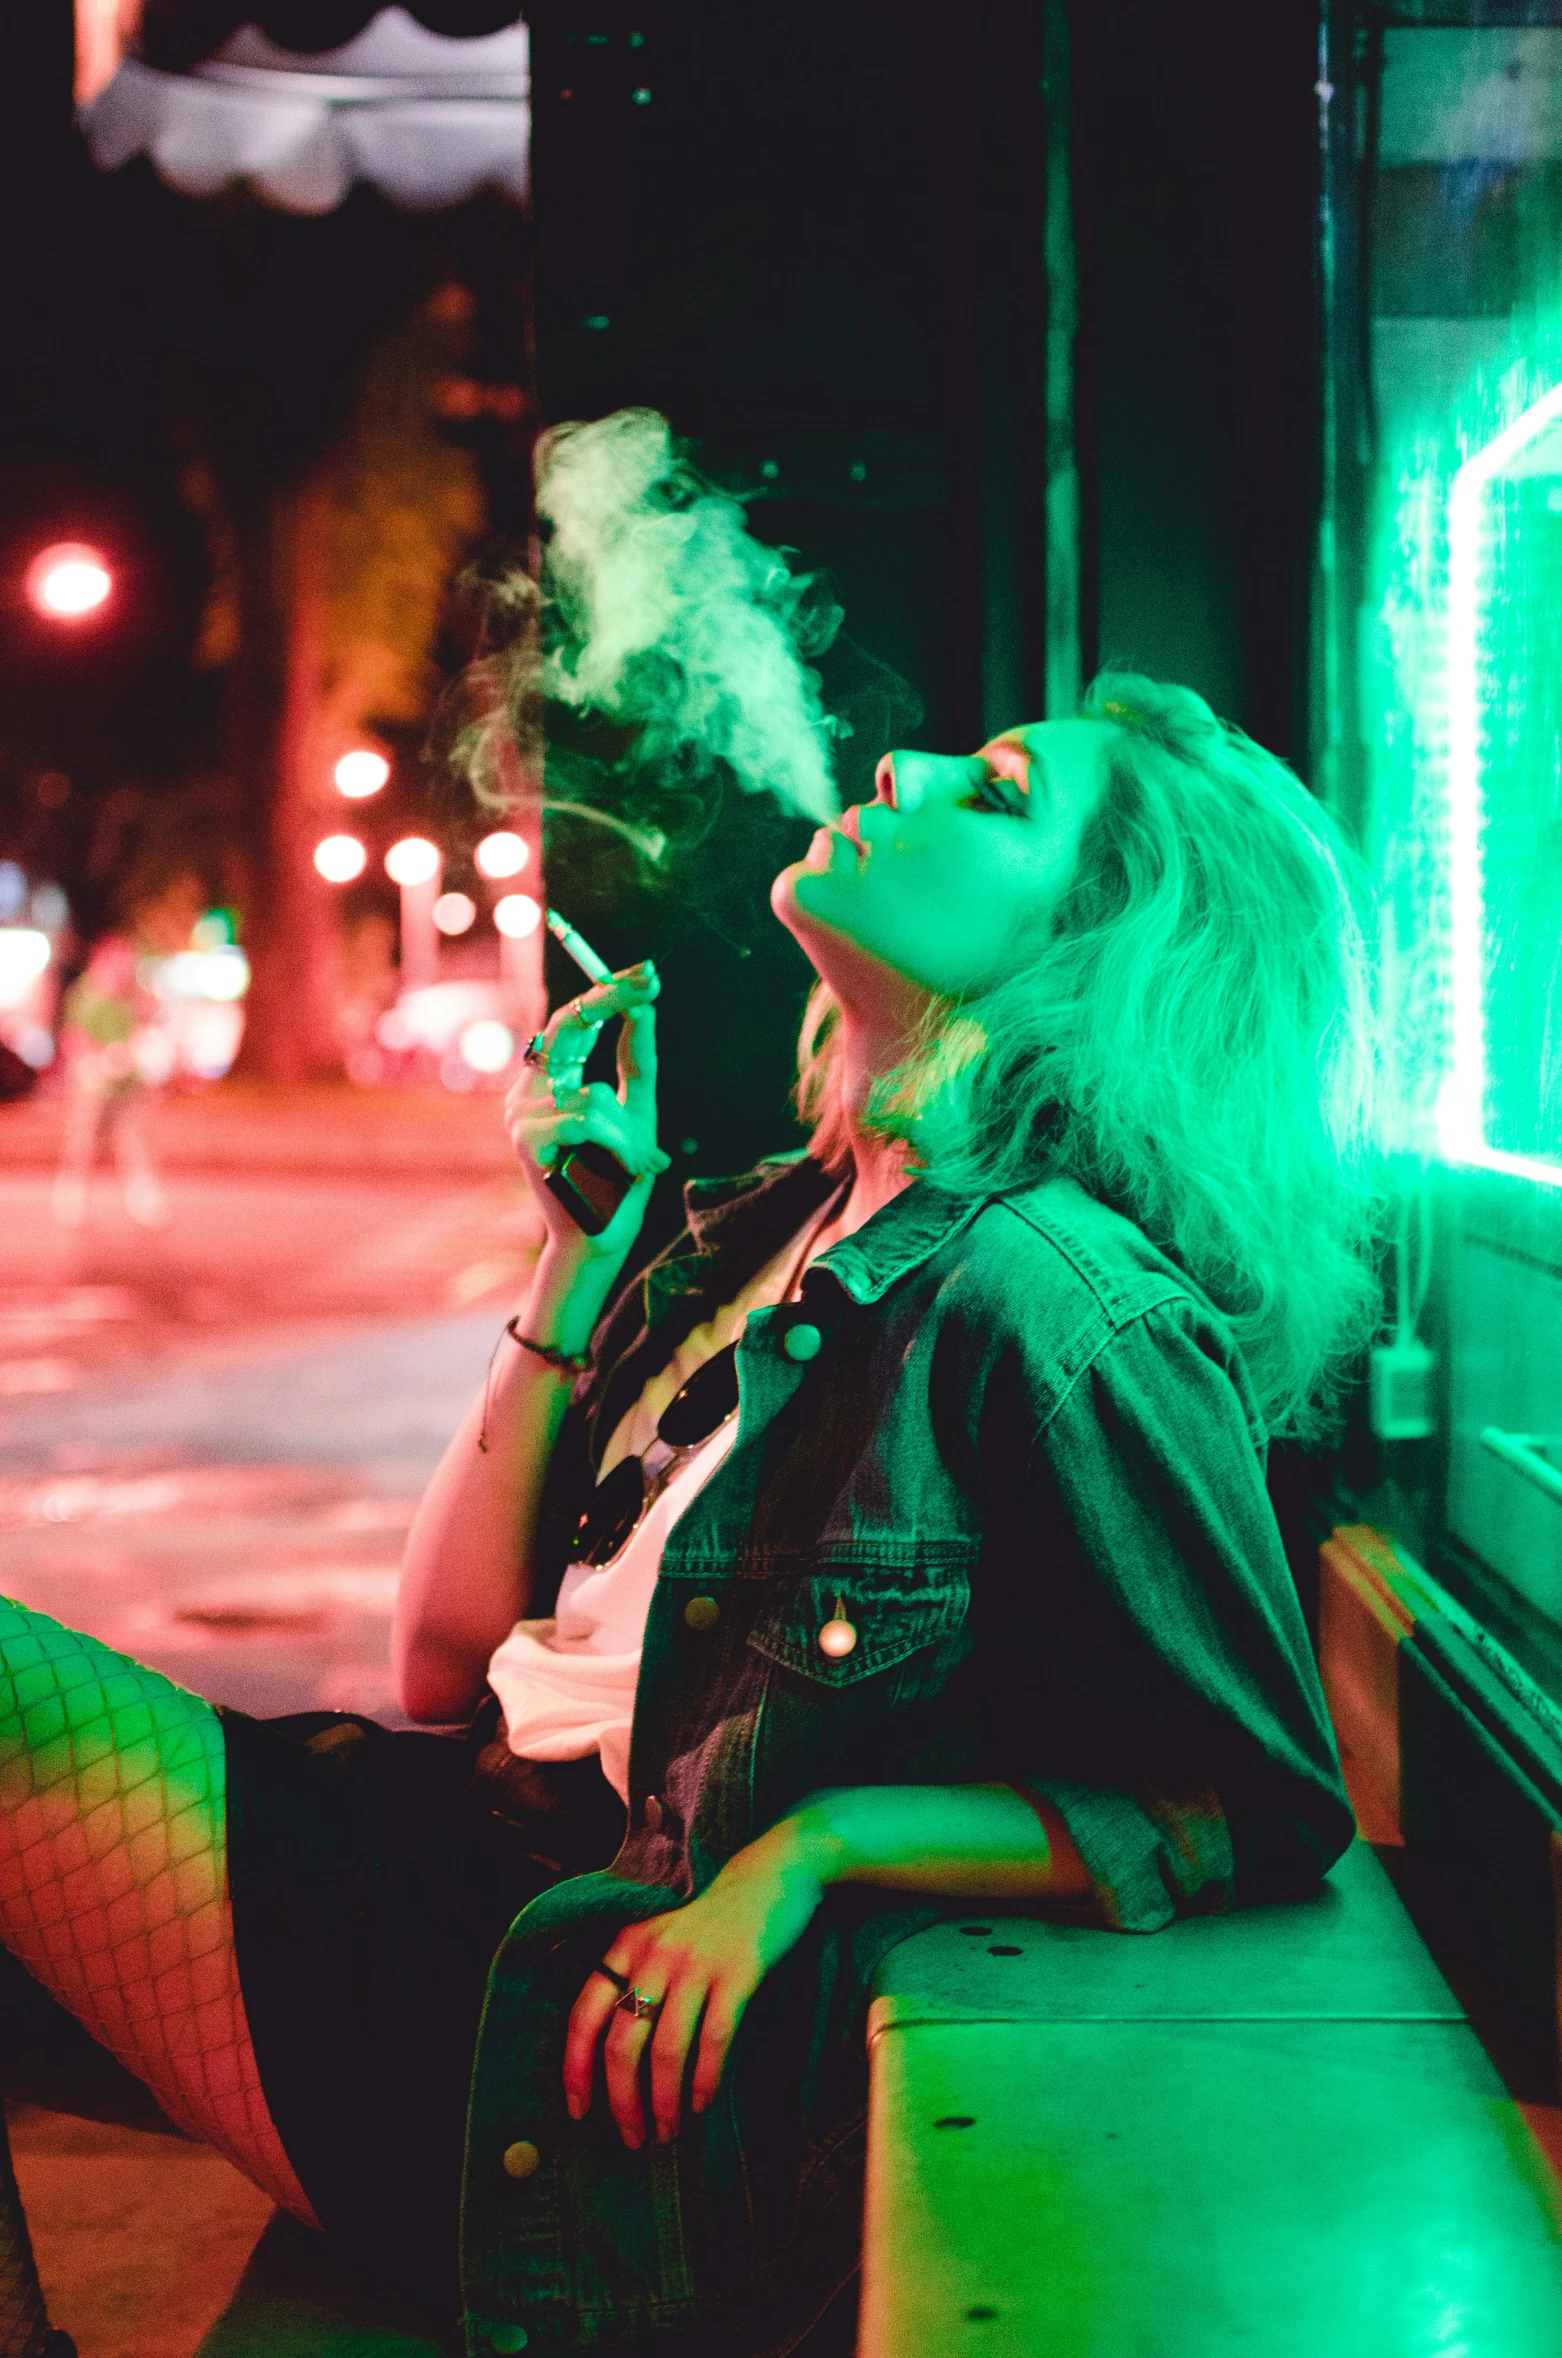 woman sitting on bench smoking with neon lights in background